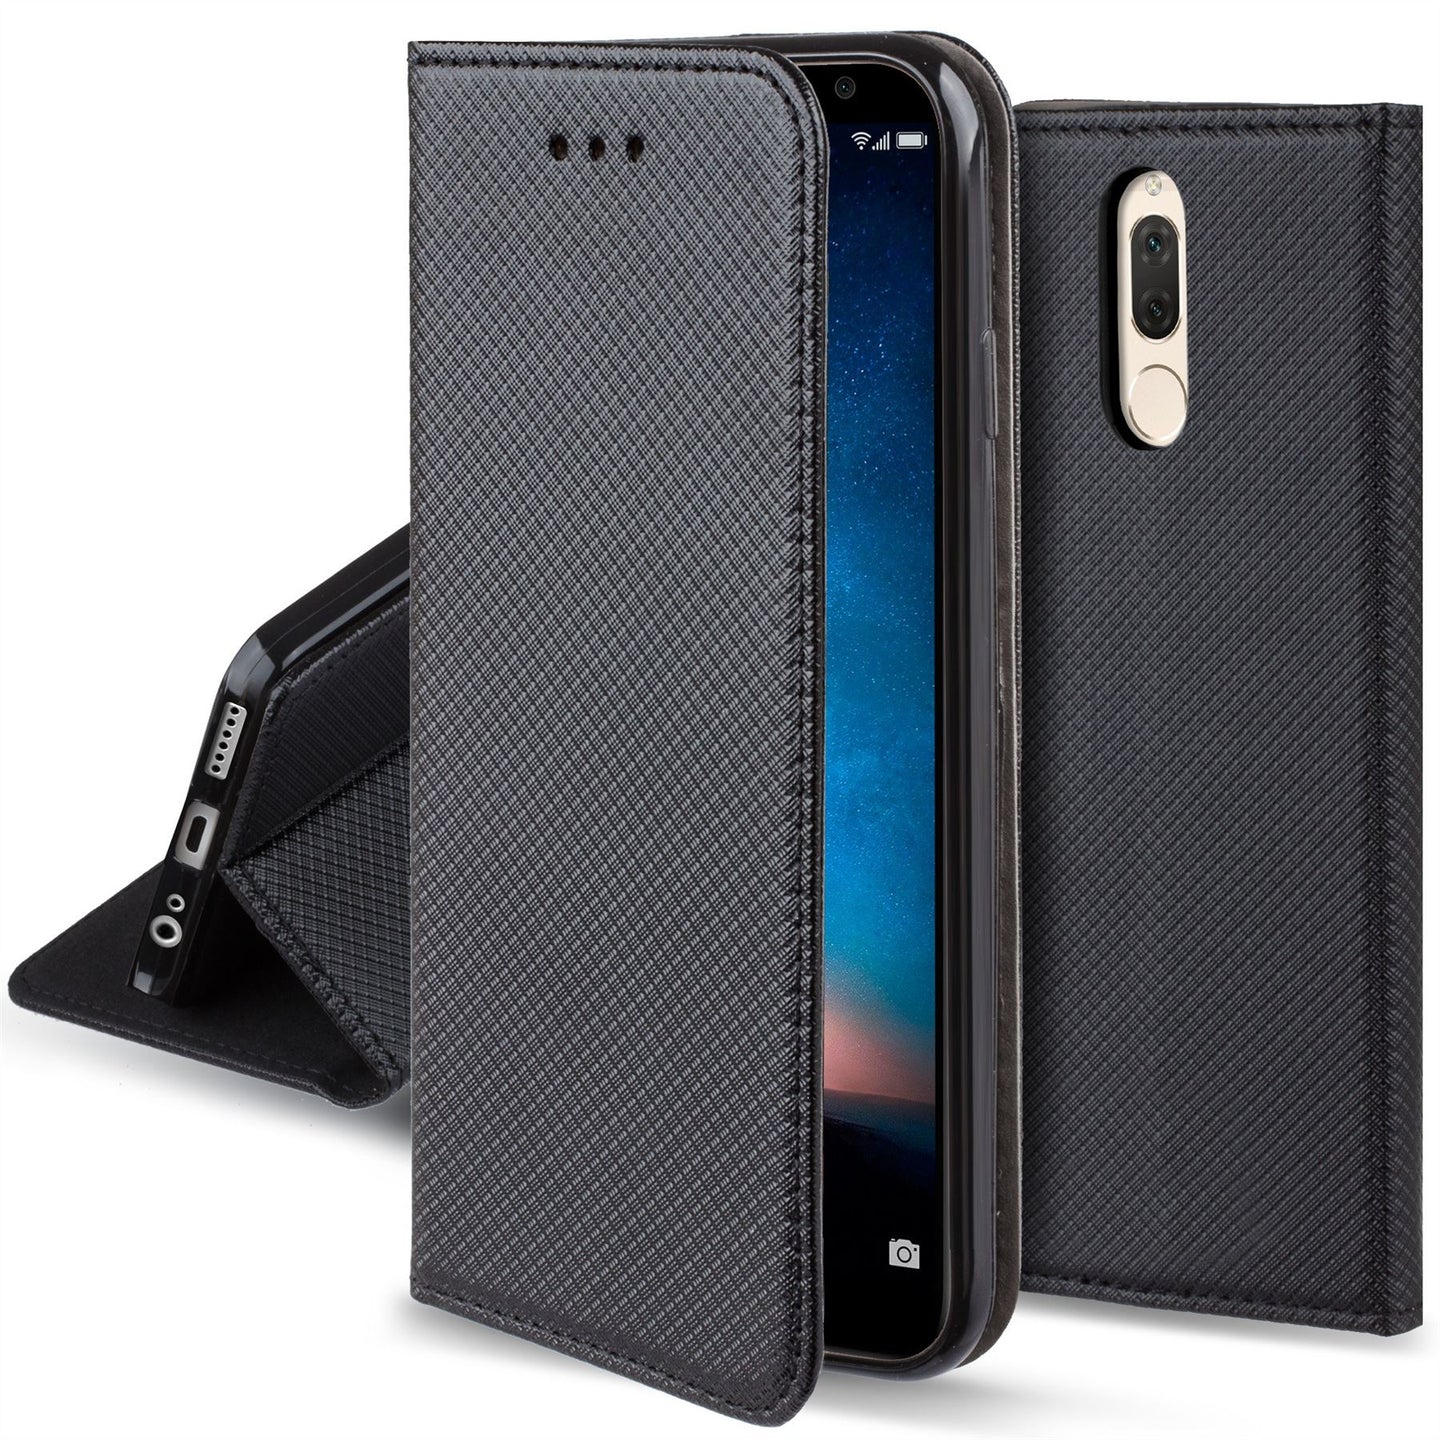 Moozy Case Flip Cover for Huawei Mate 10 Lite, Black - Smart Magnetic Flip Case with Card Holder and Stand